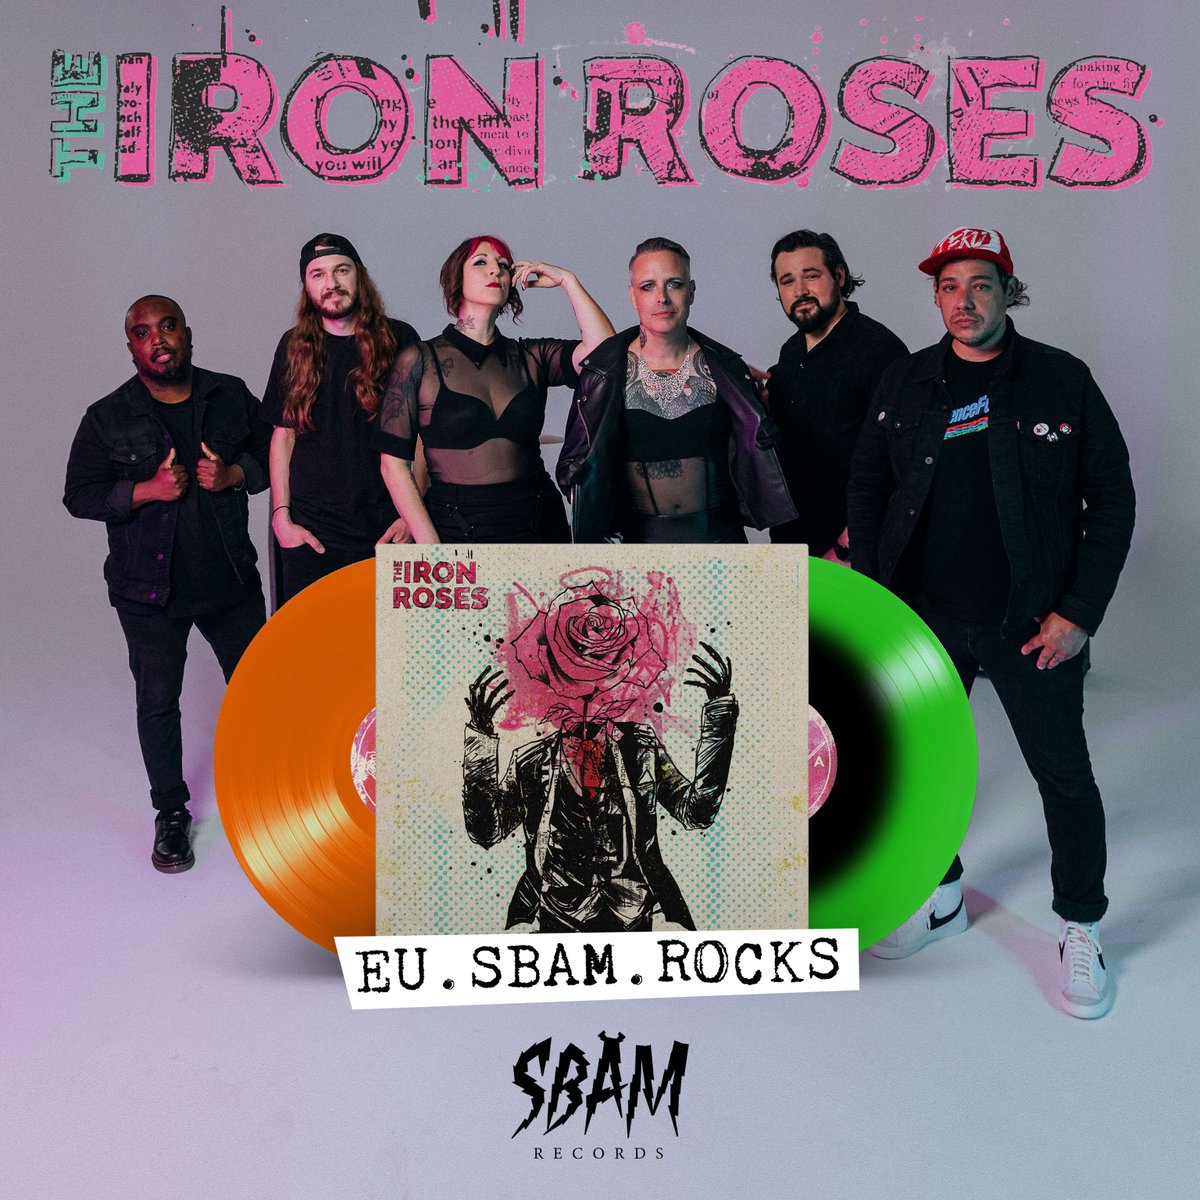 We have two brand new variants of the recent THE IRON ALBUM in our store! Ready to ship. So better grab them before they’re gone!🤘 eu.sbam.rocks